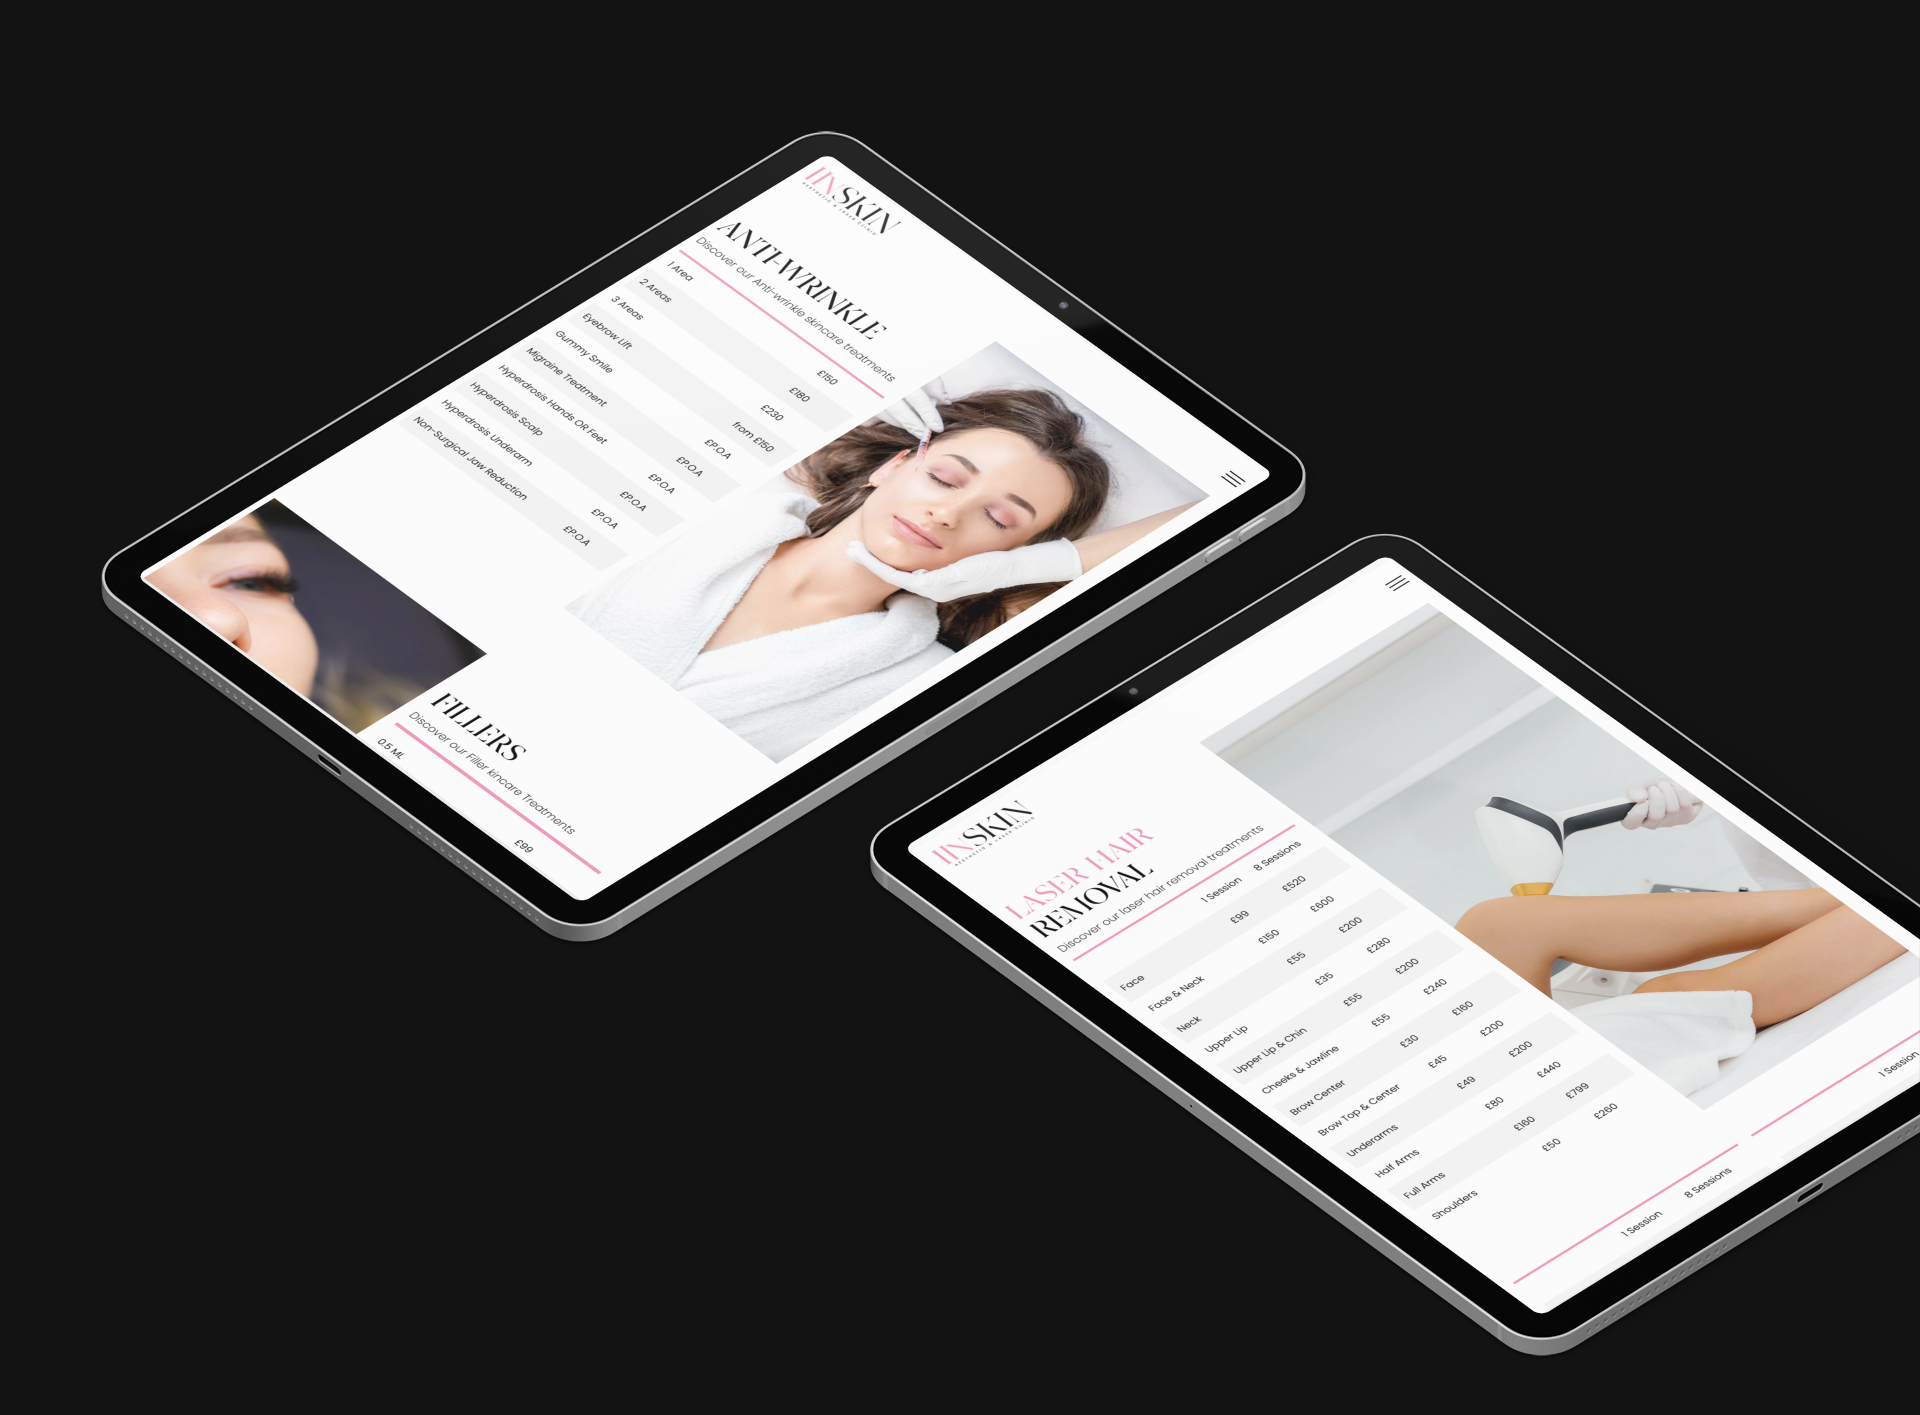 2 tablets displaying the new iinSkin website pricelist page for Anti-Wrinkle and Laser Hair Removal treatments